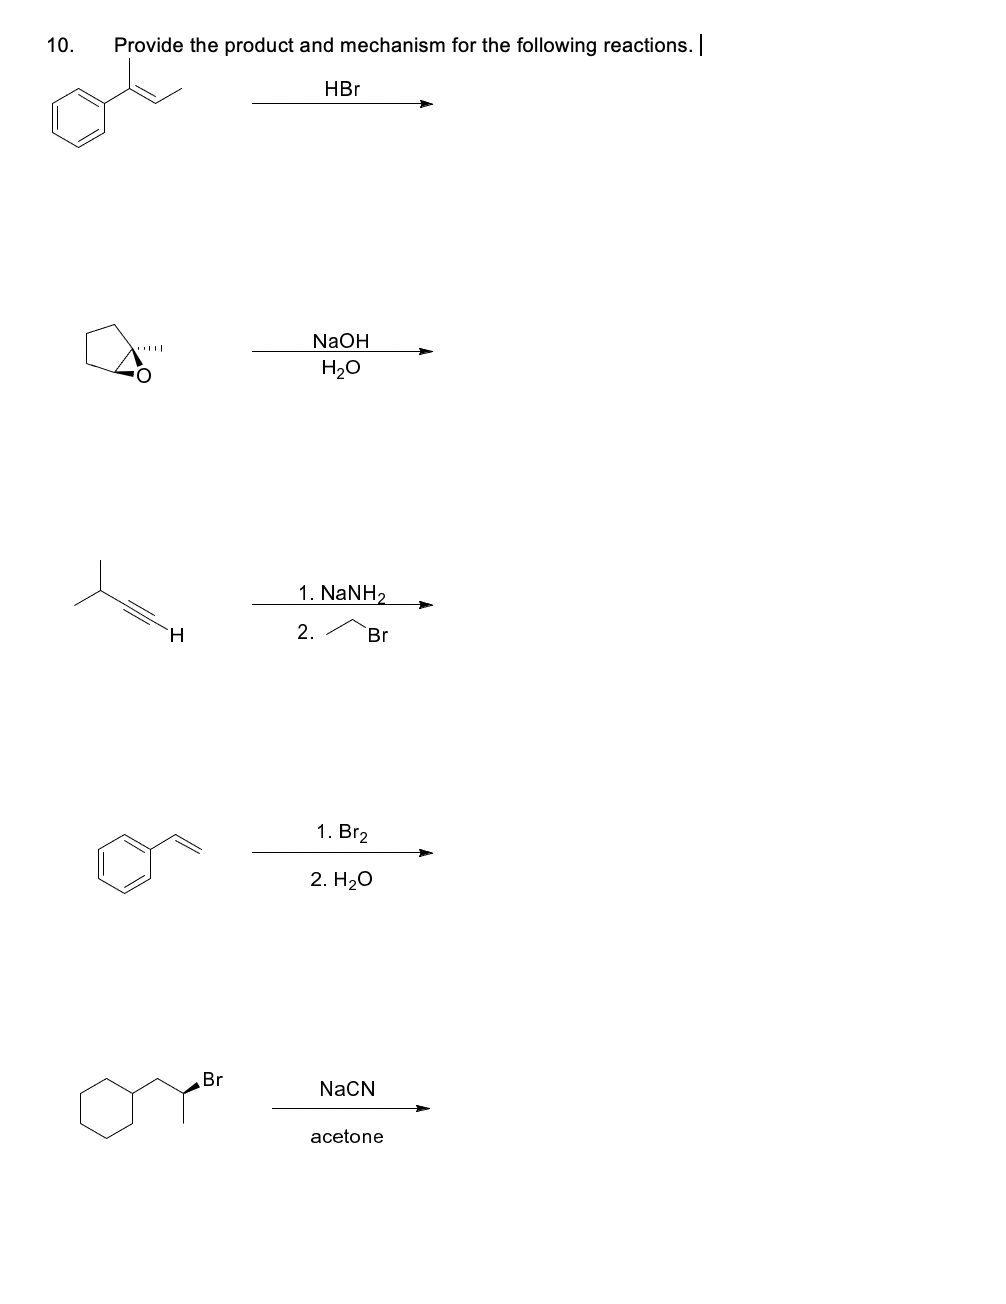 10.
Provide the product and mechanism for the following reactions.
HBr
NaOH
H20
1. NaNH2
`H
2.
Br
1. Br2
2. H20
Br
NaCN
acetone
